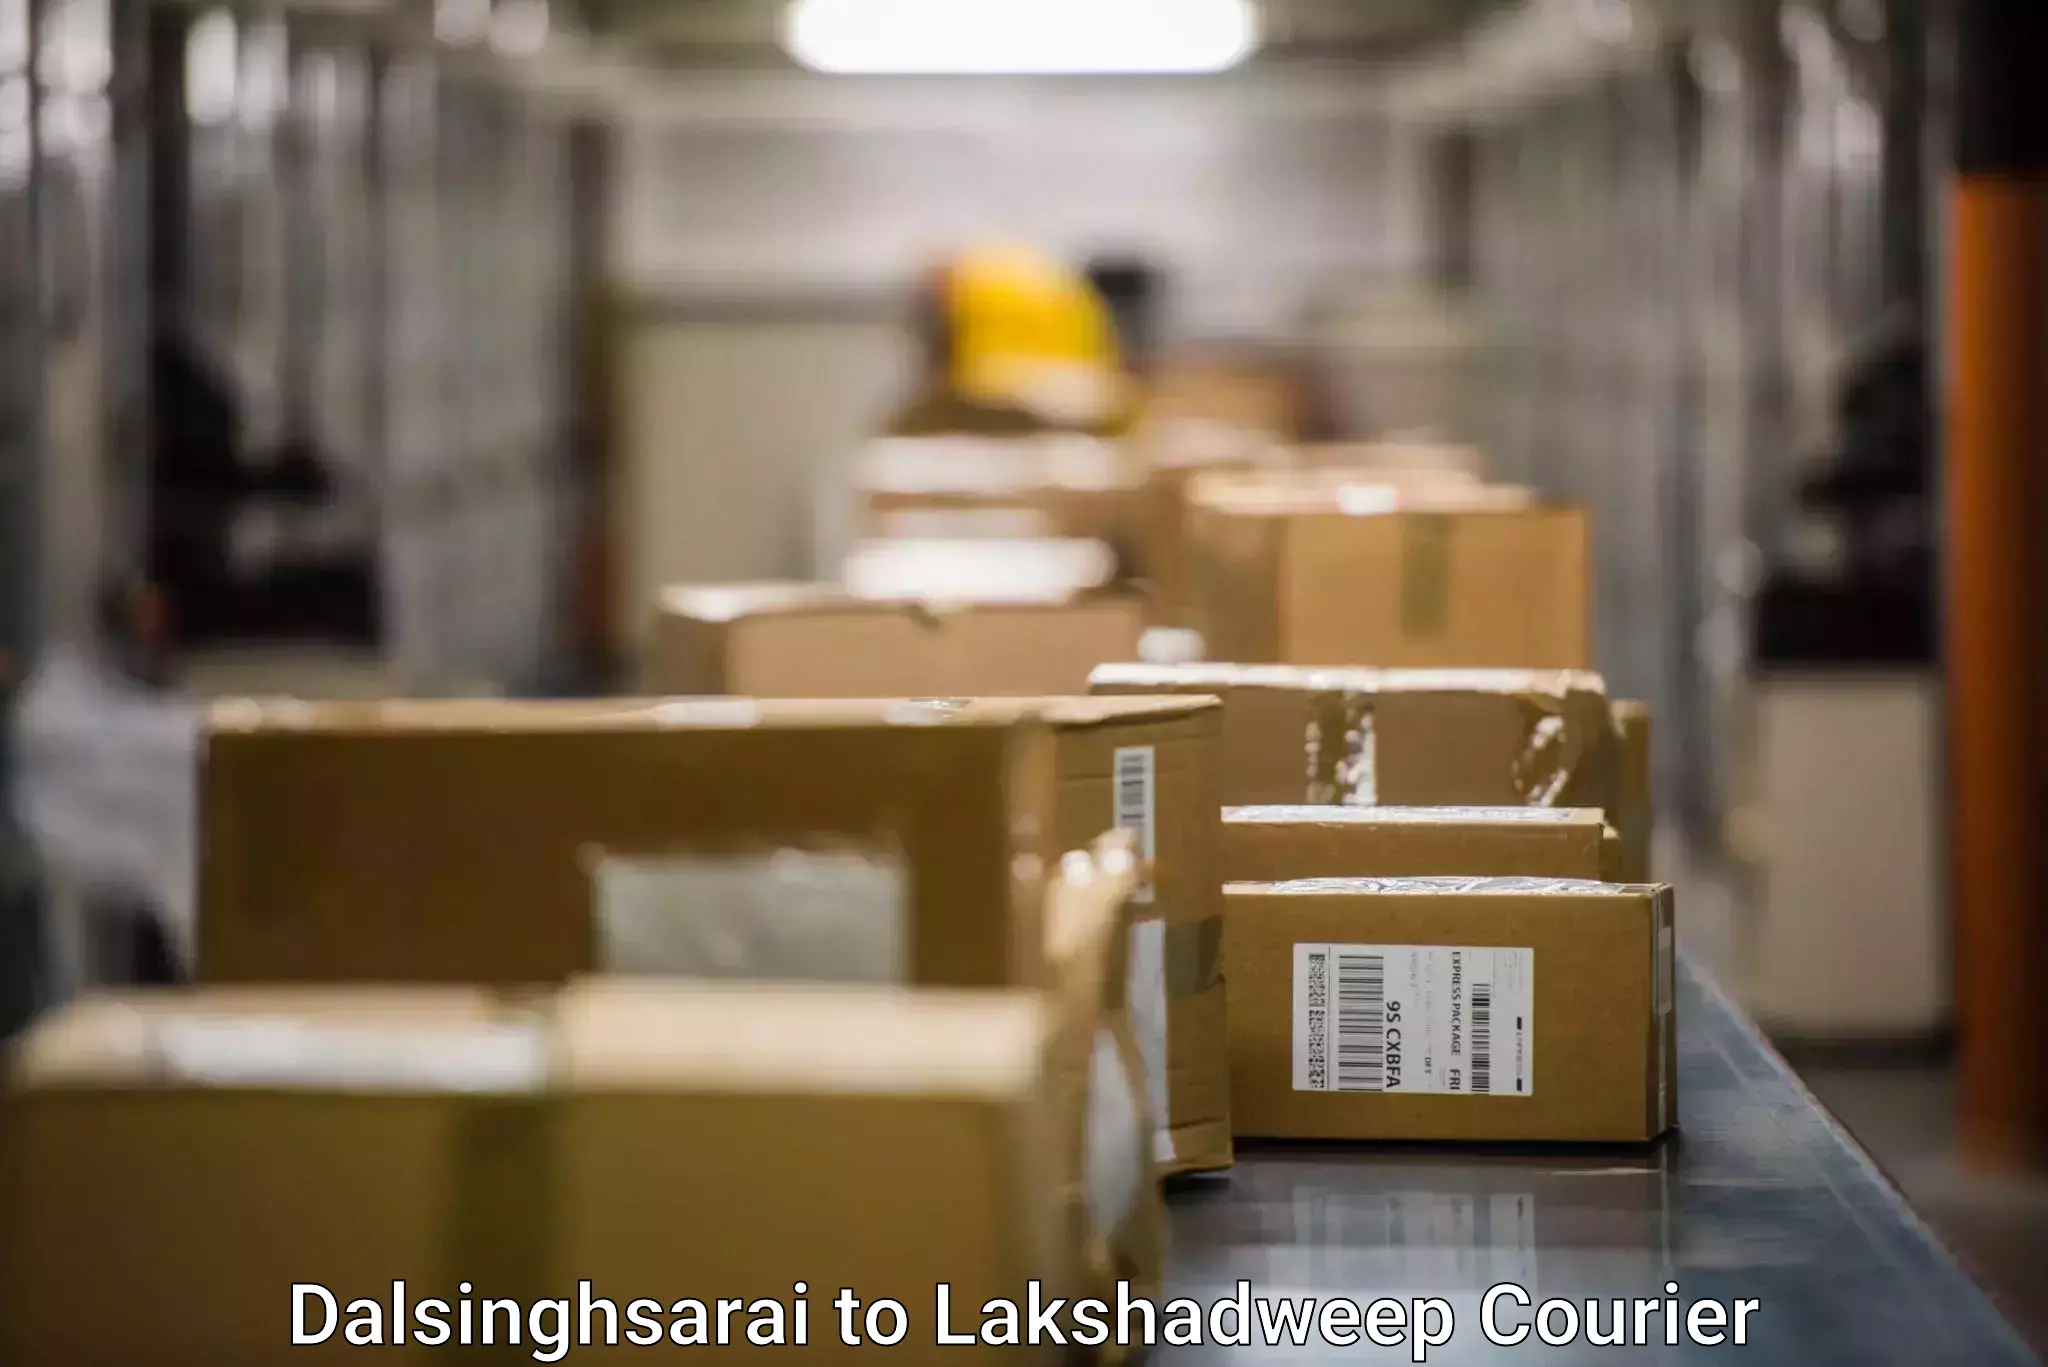 Affordable parcel rates in Dalsinghsarai to Lakshadweep